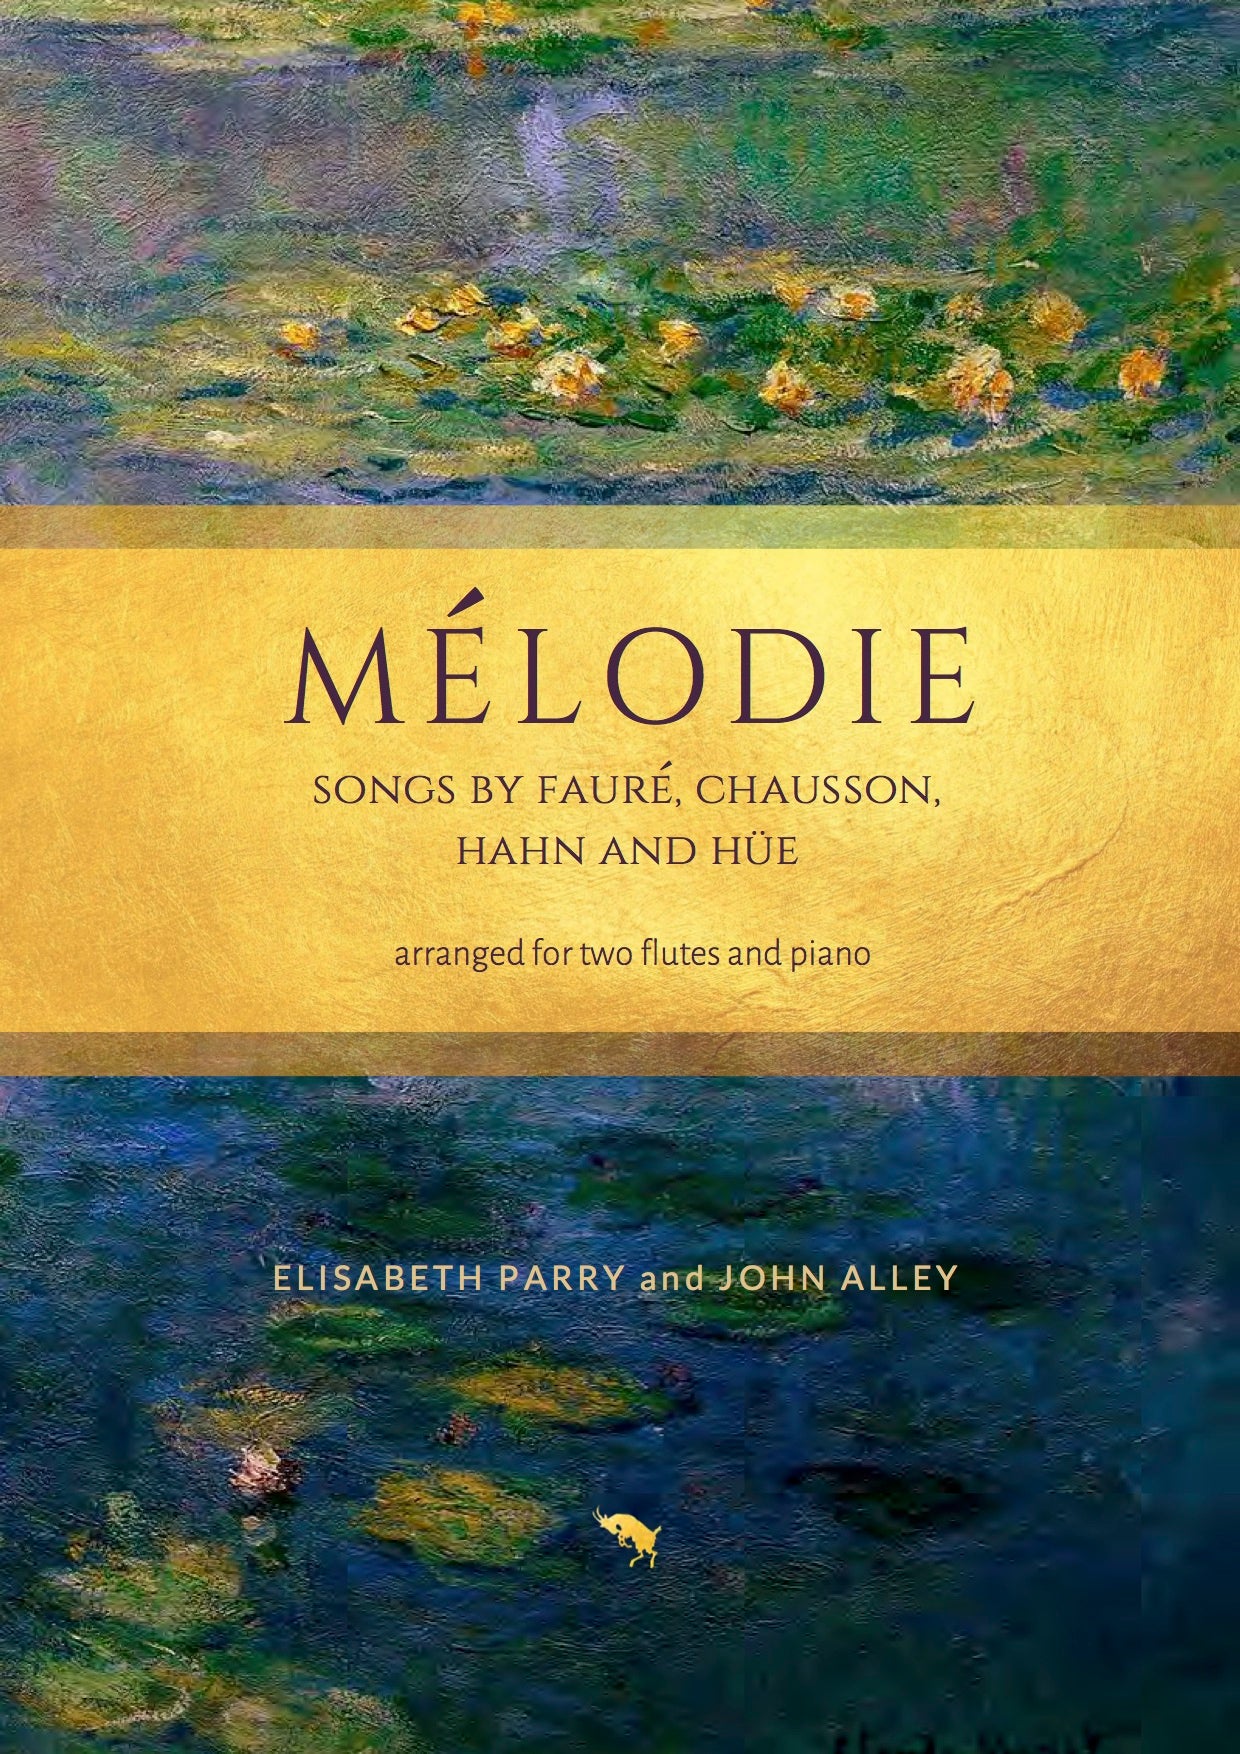 Mélodie: Songs by Fauré, Chausson, Hahn and Huë (arr. for 2 flutes & piano)